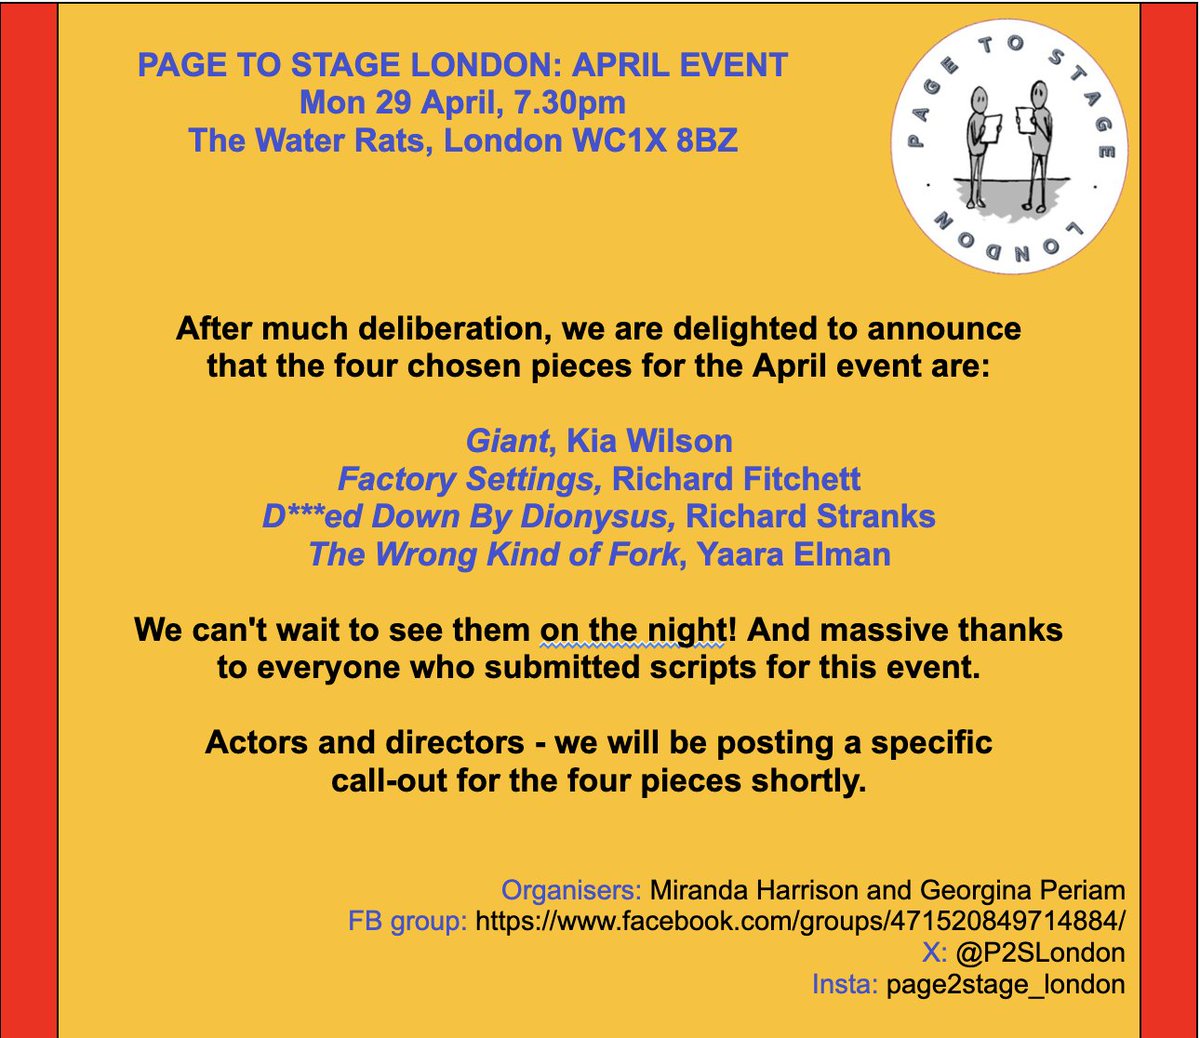 A huge thanks to all who submitted scripts for our April event. We had a bumper selection this month with brilliantly varied subject matters and styles. Mark your diaries for Monday 29th April, 7:30pm @Water_Rats - it's going to be a brilliant evening of #newwriting